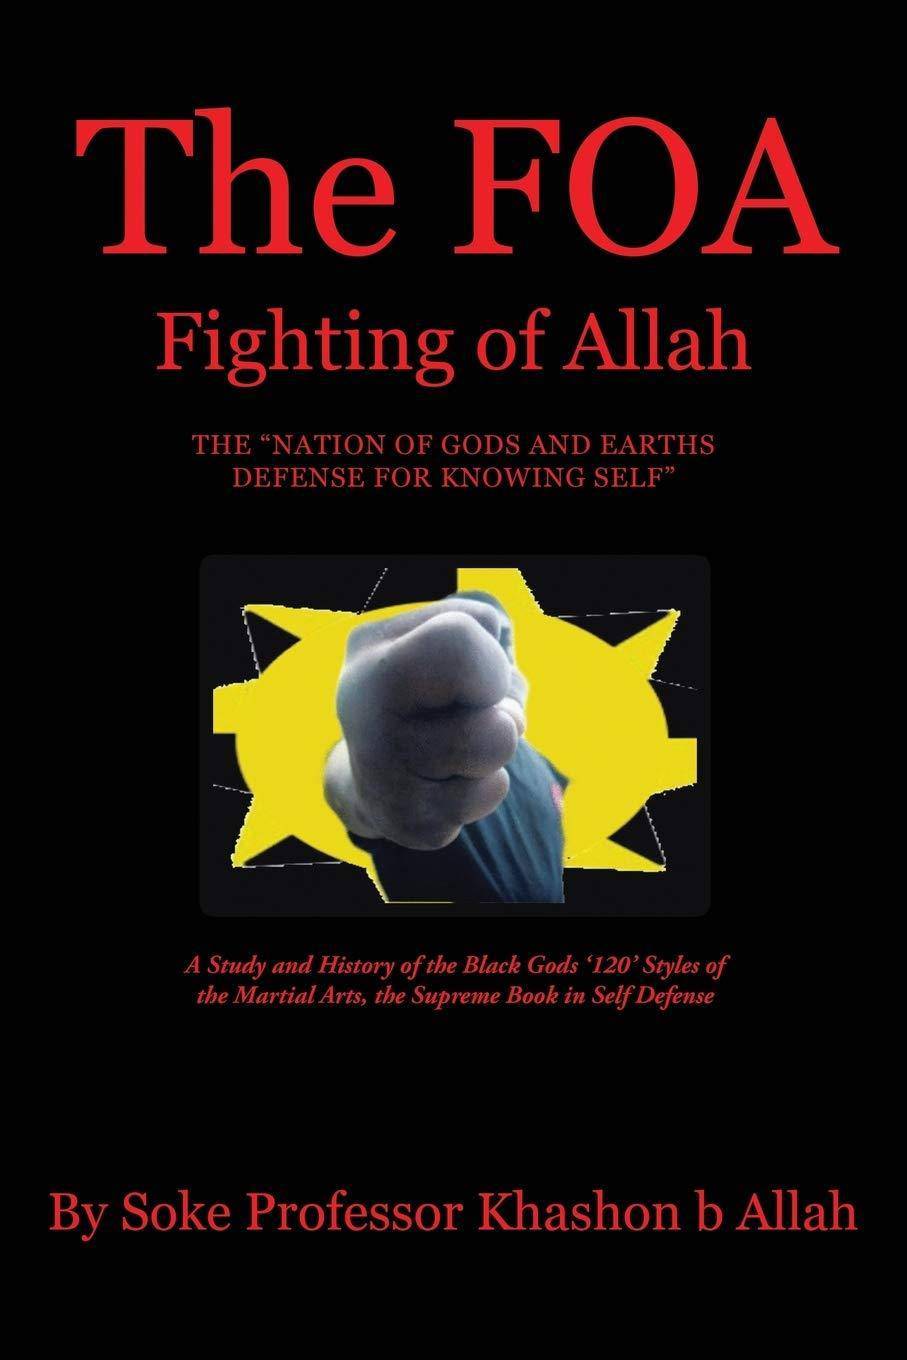 The FOA Fighting of Allah the "Nation of Gods and Earths Defense for Knowing Self" - SureShot Books Publishing LLC